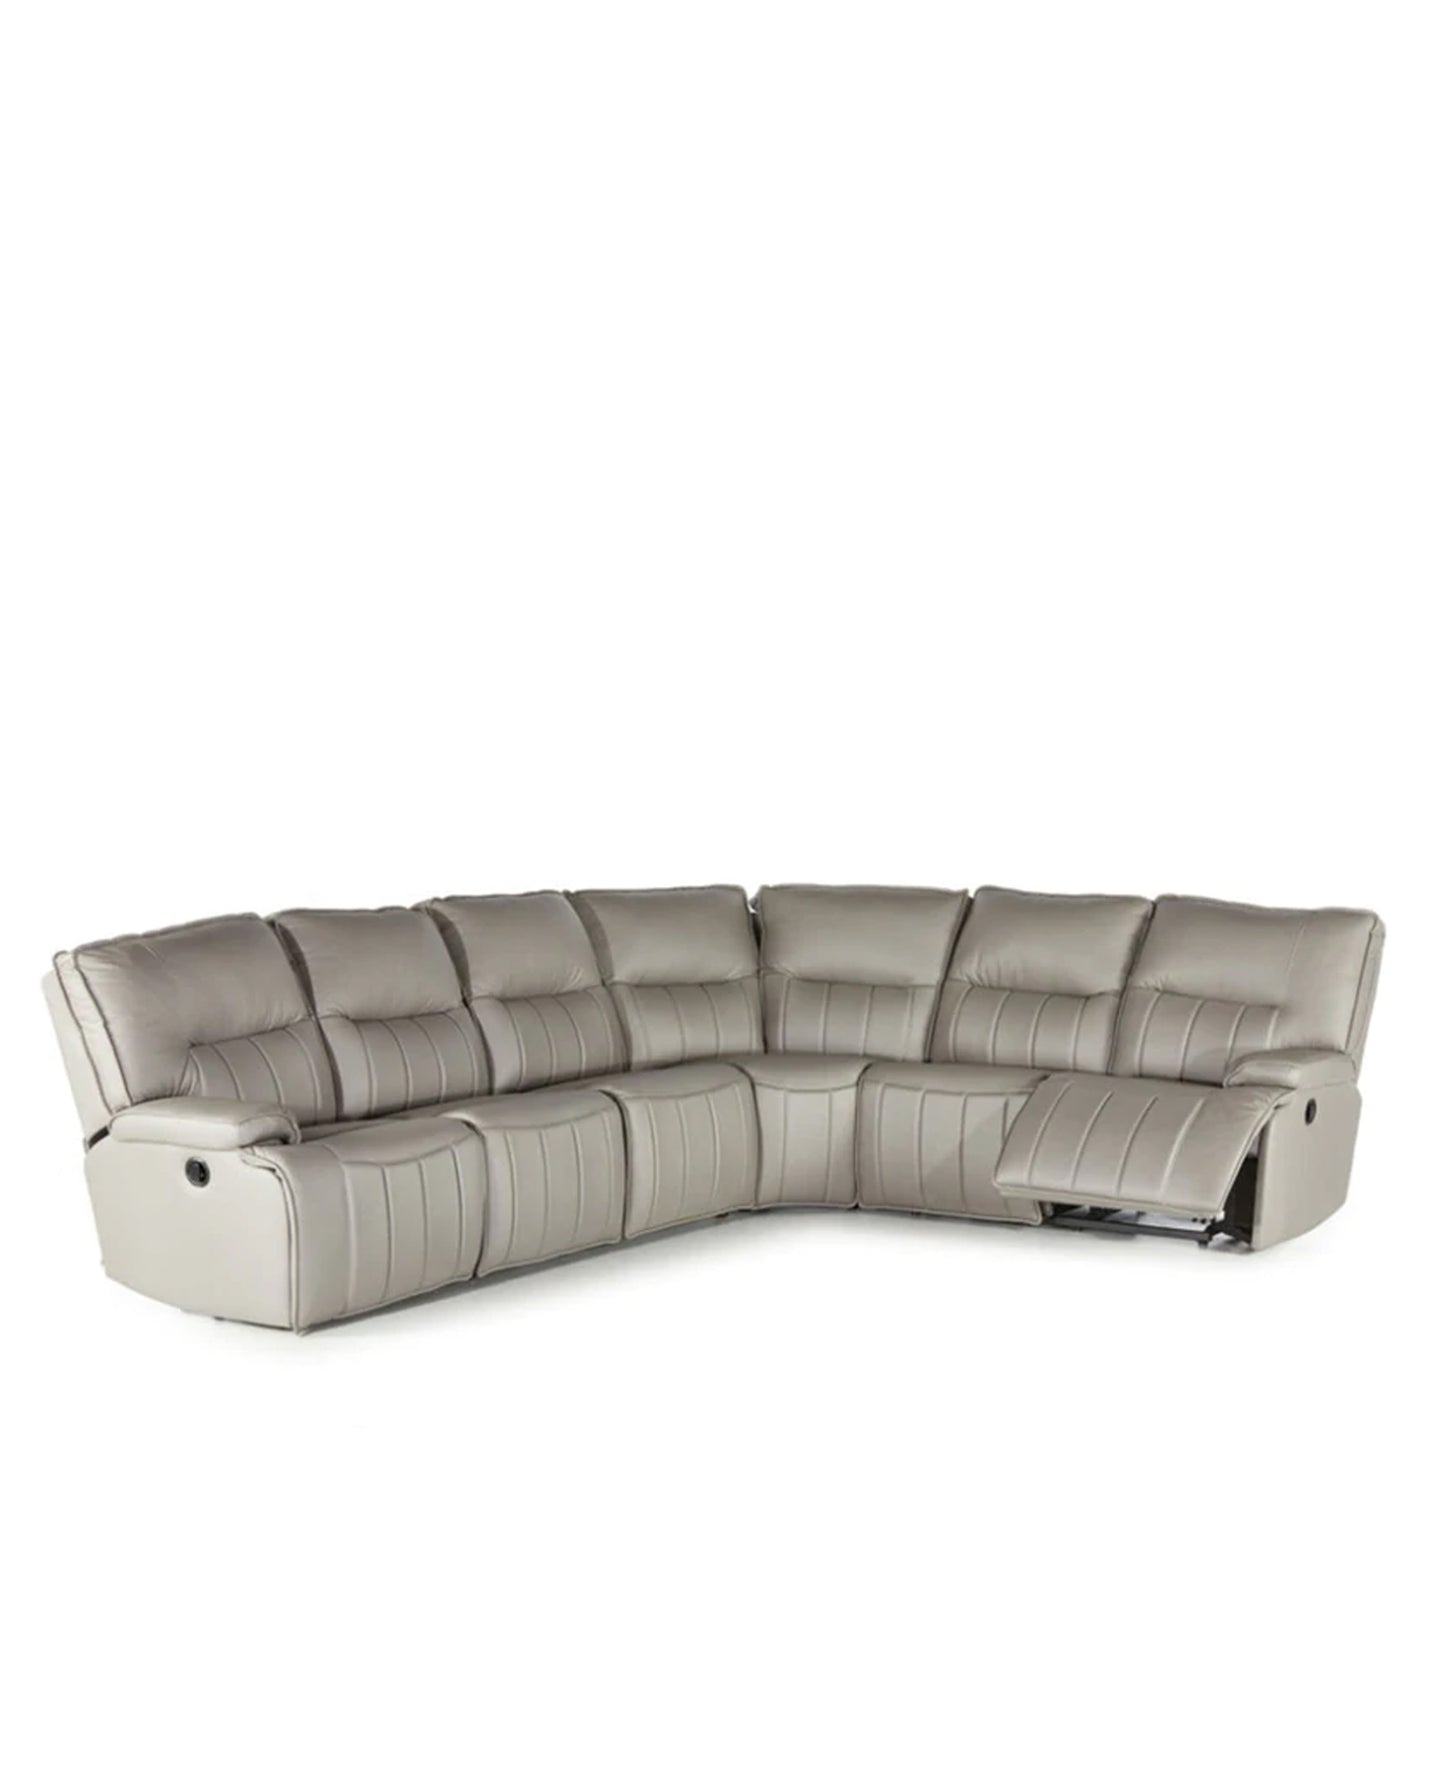 Grafton Everest Colby Corner Lounge suite - White